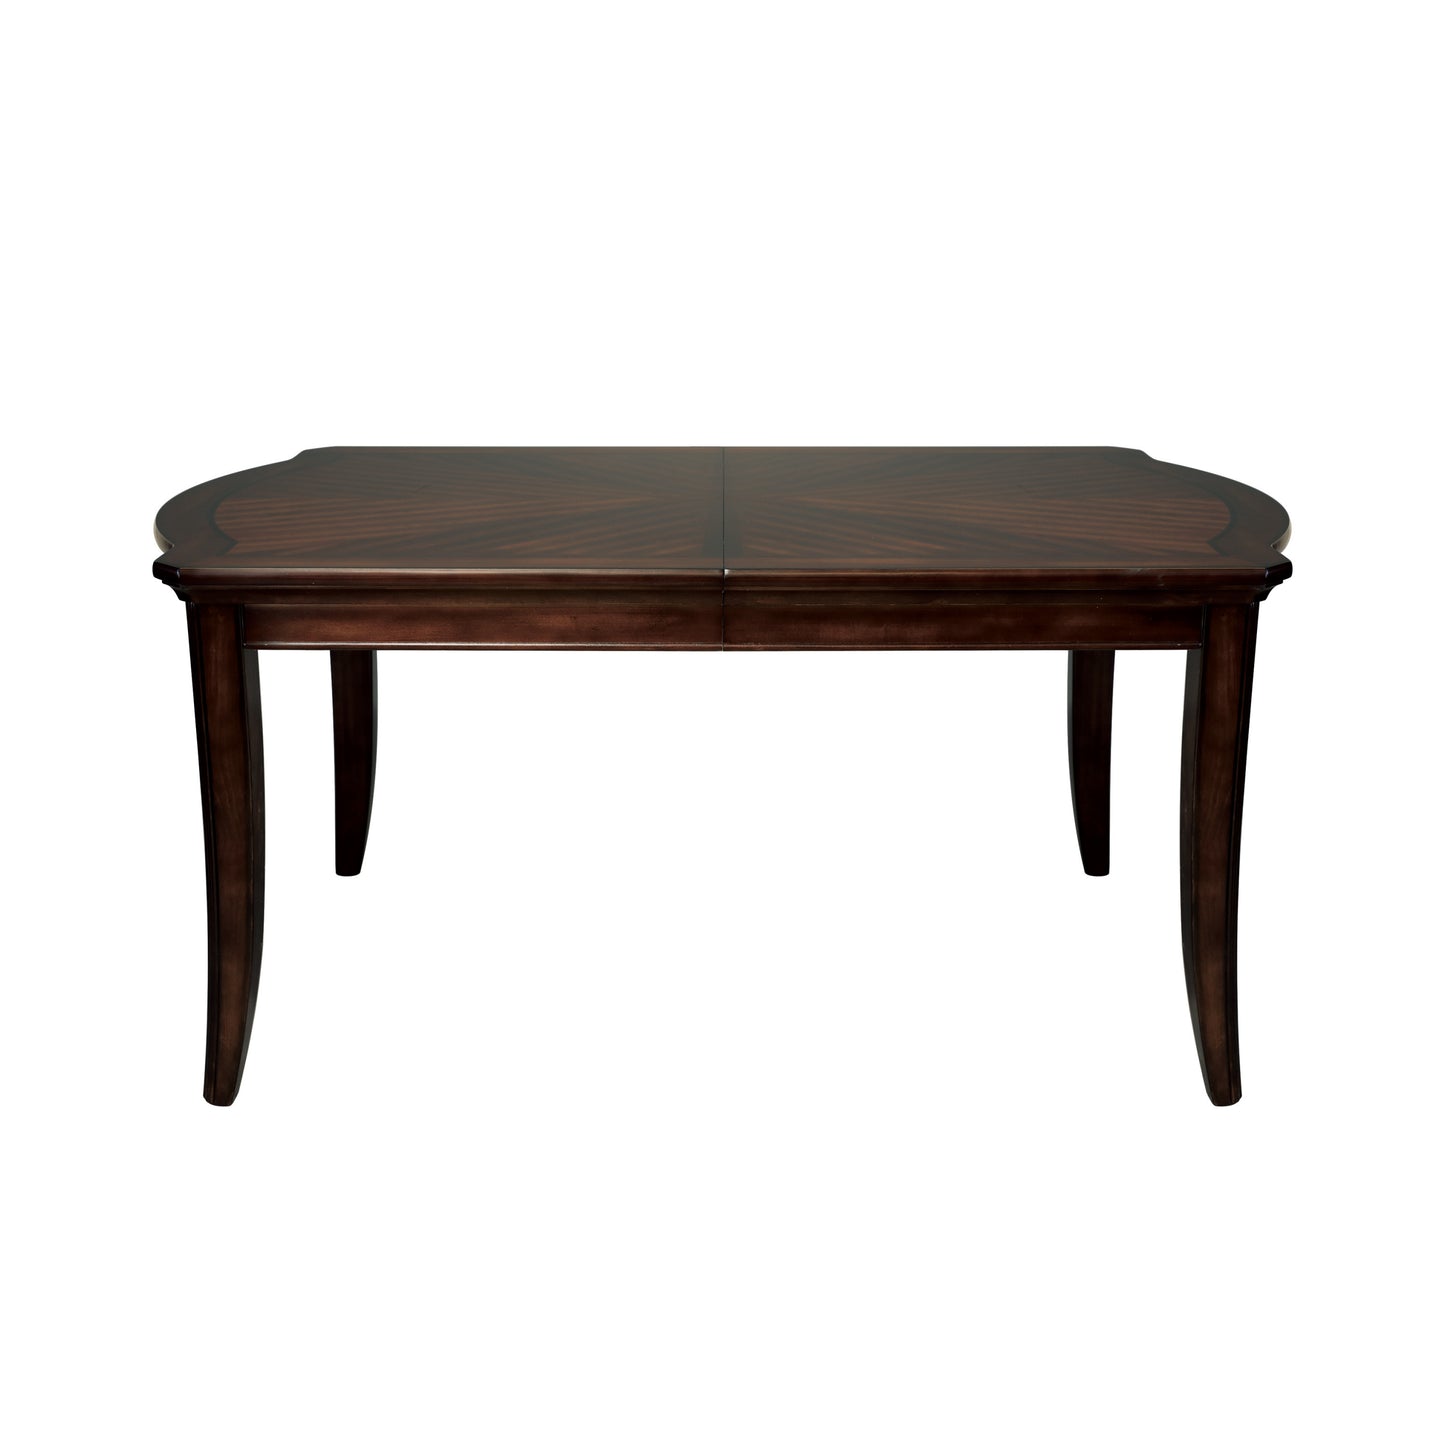 1st Choice Elegant Formal Dining Table Set Furniture in Cherry Finish